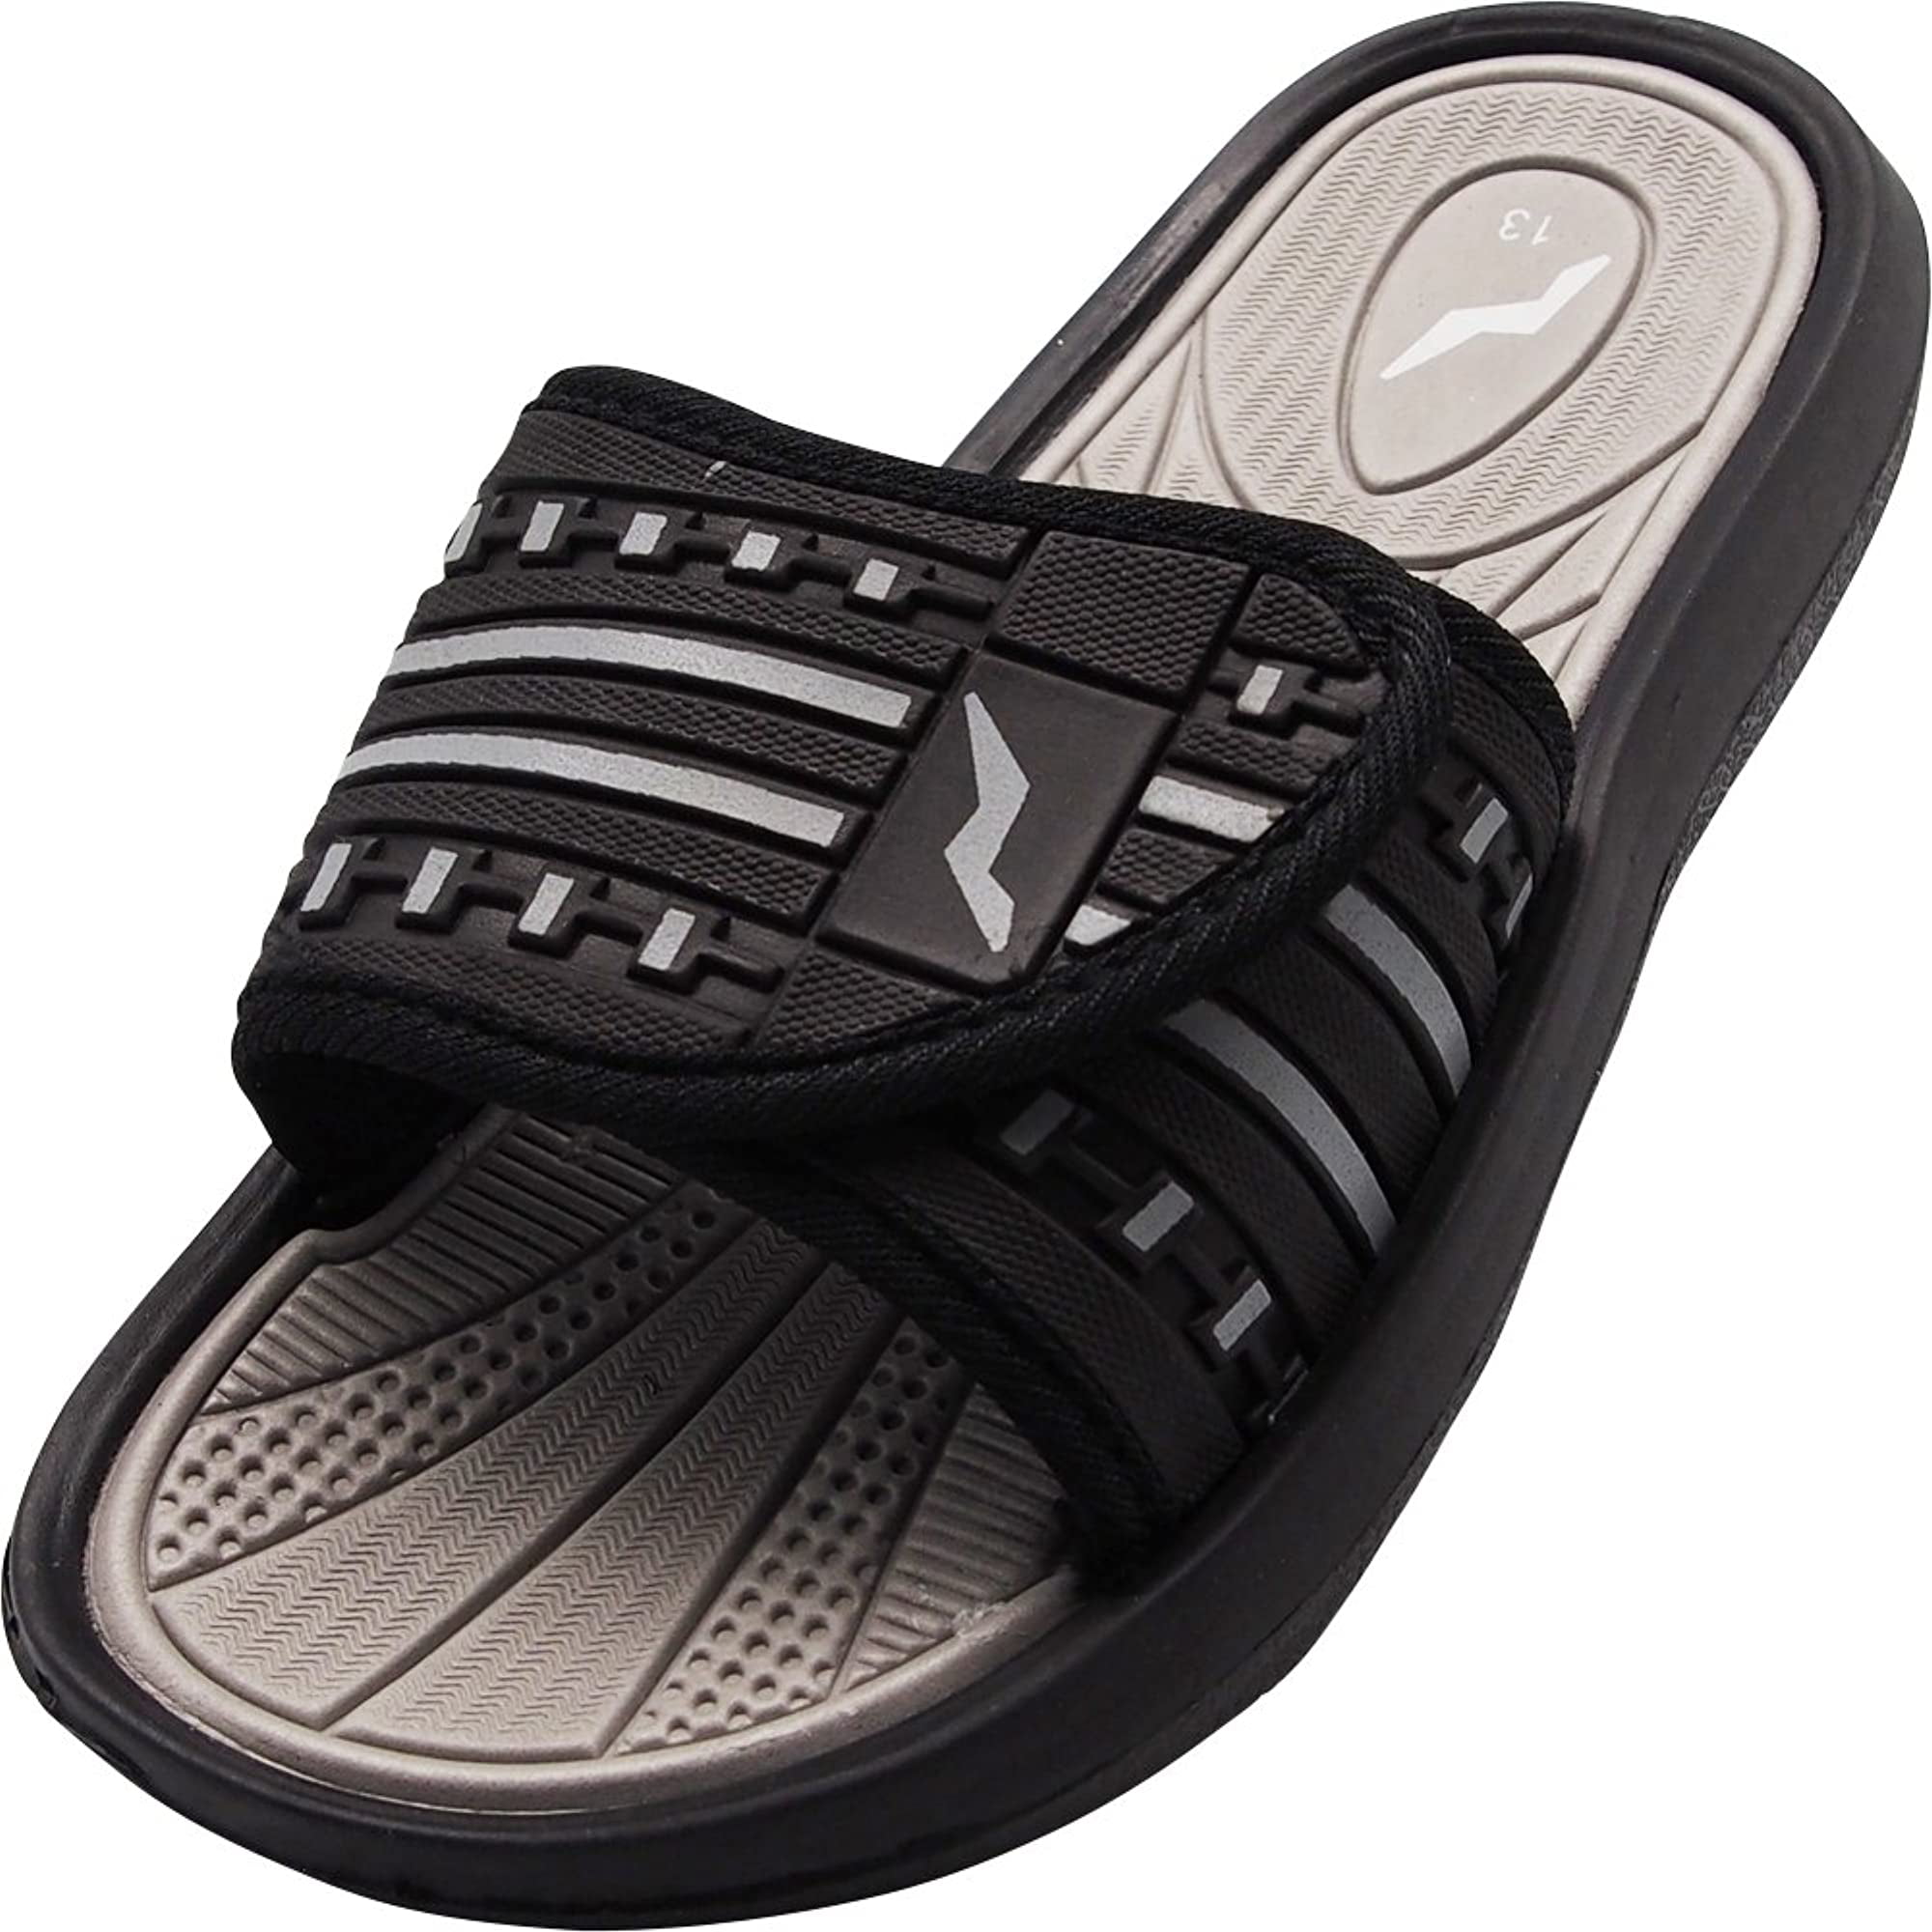 Runs 1 Size Small NORTY Boys Slide Strap Shower Beach Pool Sandal 2 Color Combinations 